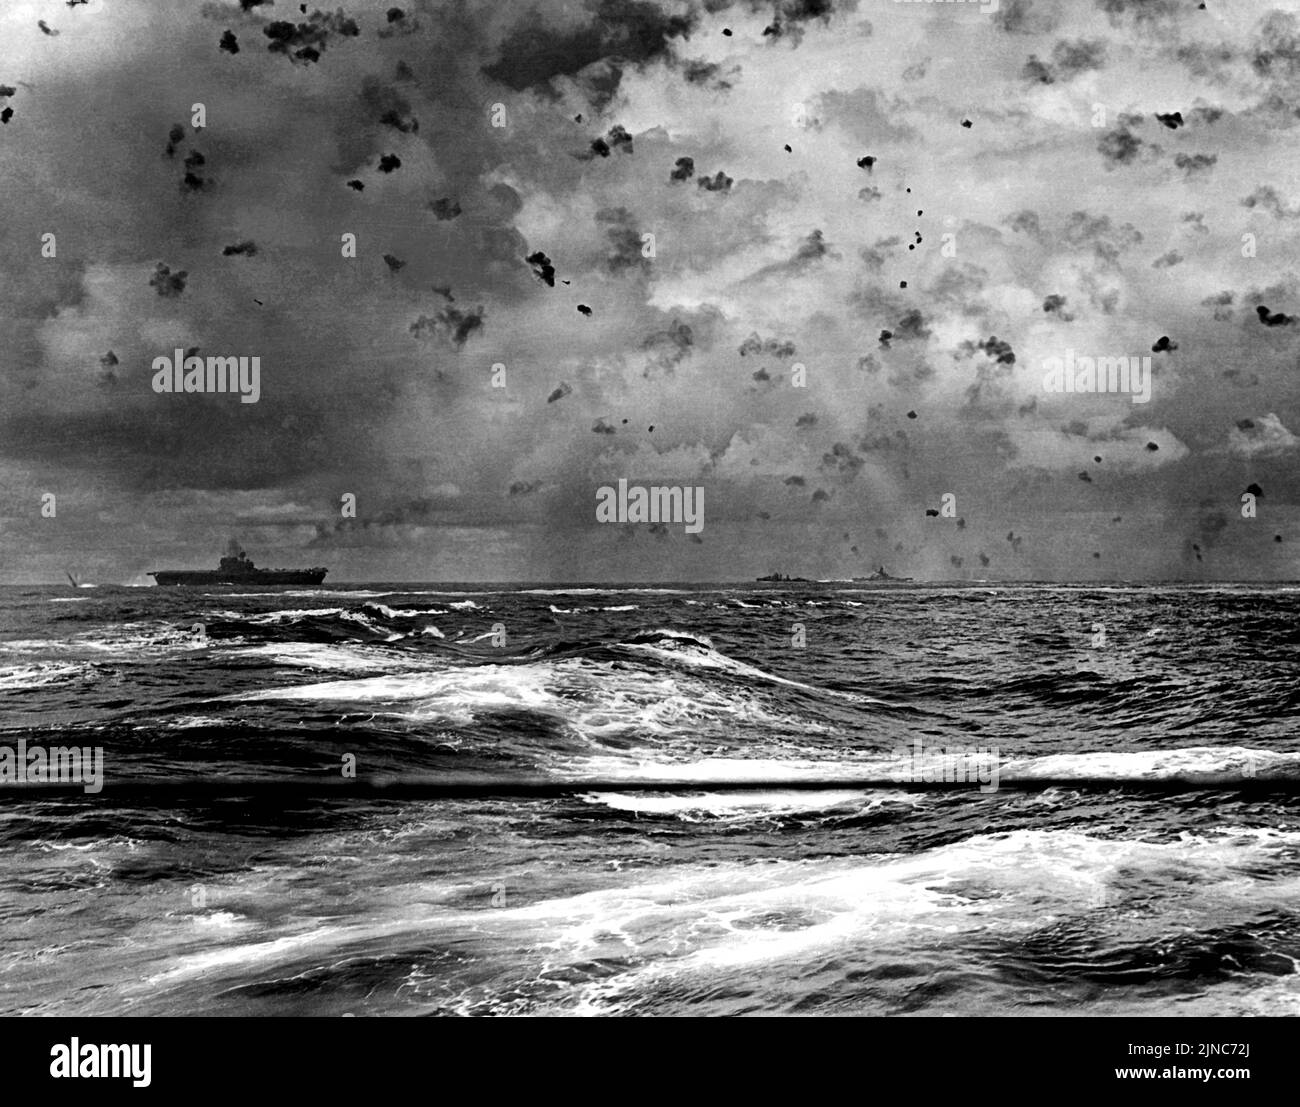 In a dramatic action photo the U.S. Navy aircraft carrier USS Enterprise (CV-6) and other ships of her screen in action during the Battle of Santa Cruz, 26 October 1942. One bomb is exploding off her stern, while two Japanese dive bombers are visible directly above the carrier and towards the center of the image. Stock Photo